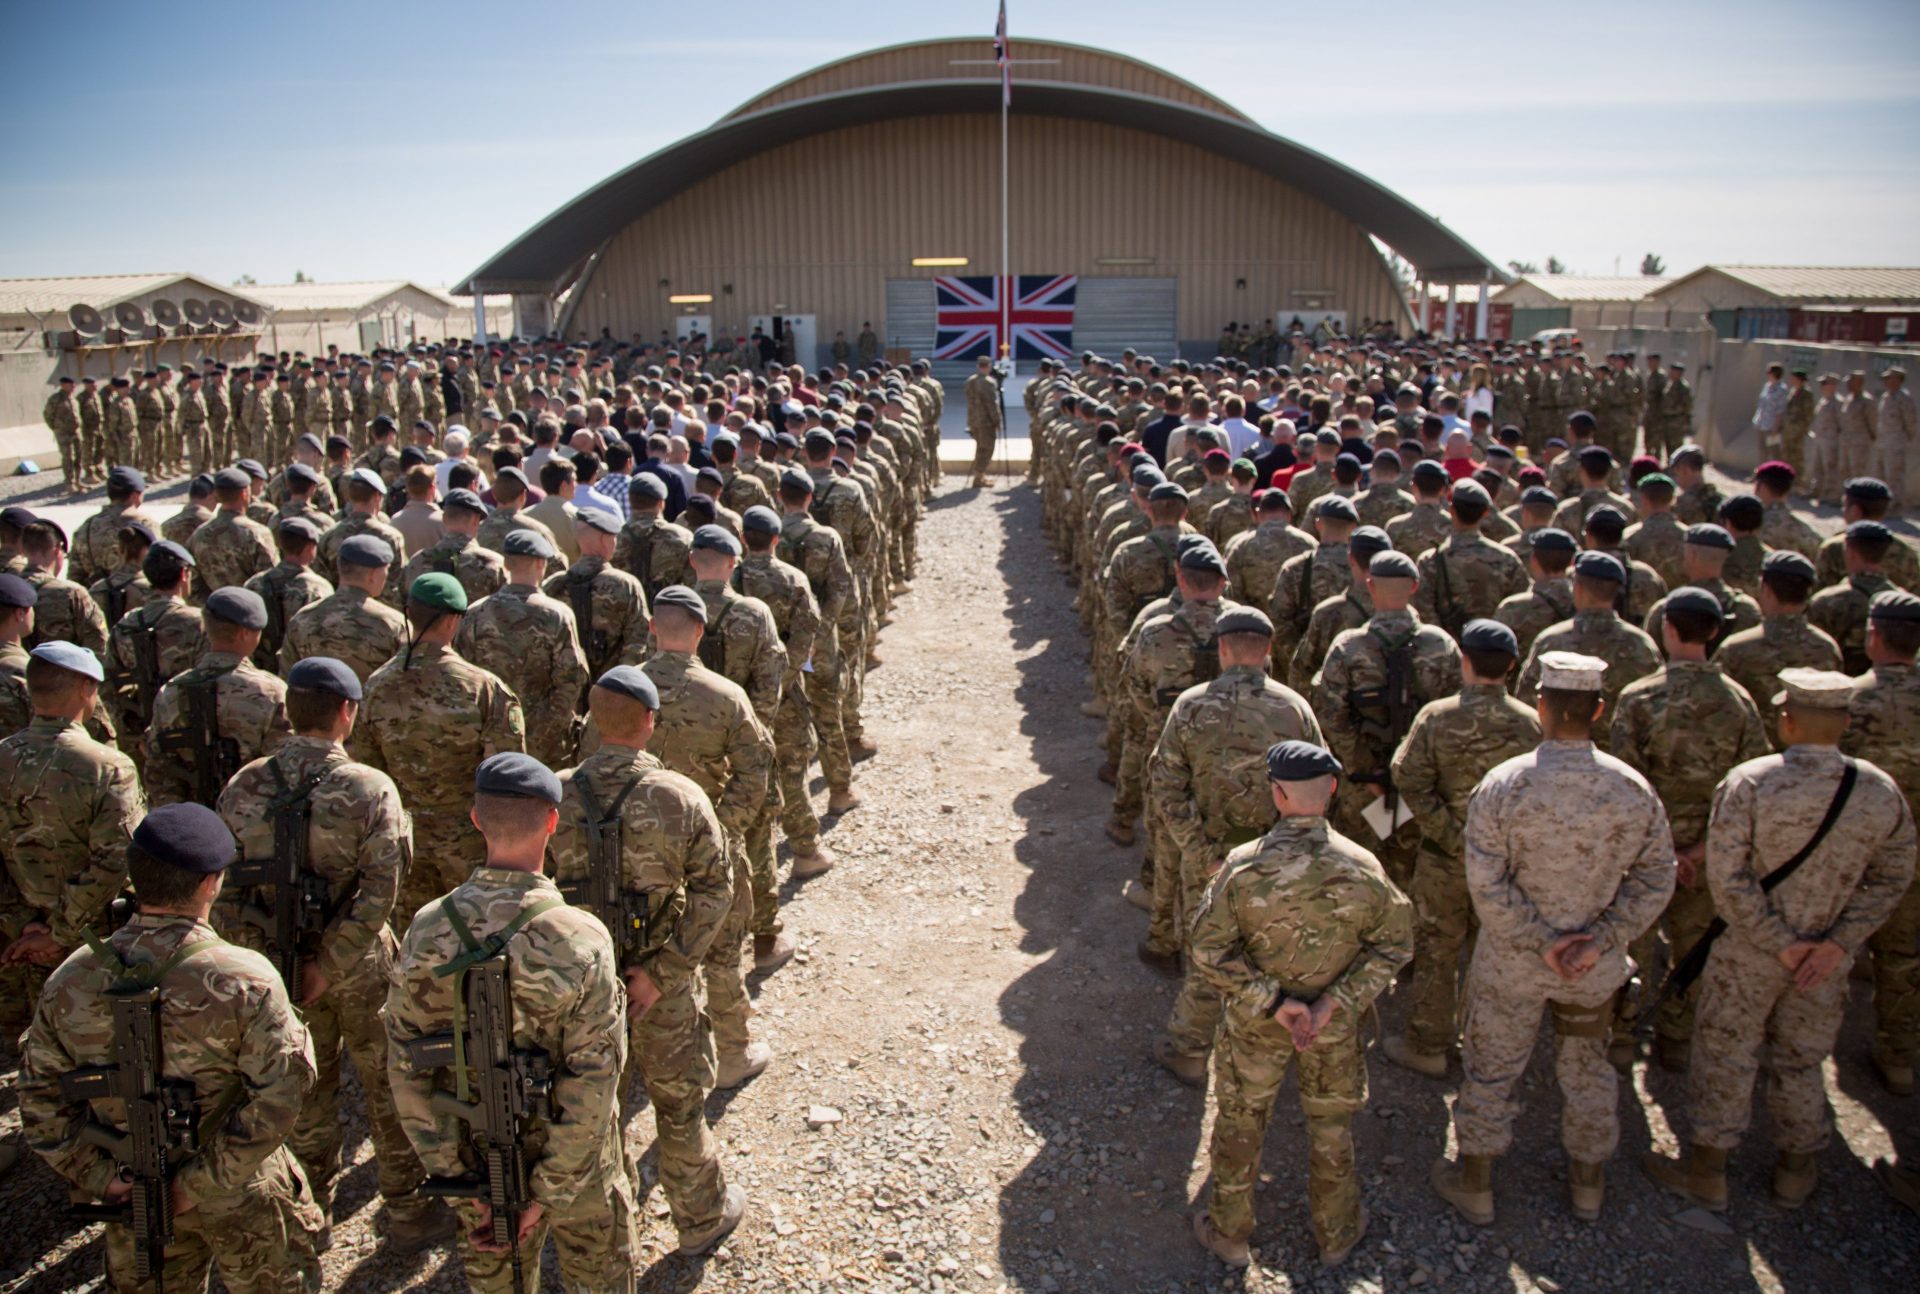 British troops and service personal gather for a Remembrance Sunday service at Kandahar Airfield, November 2014